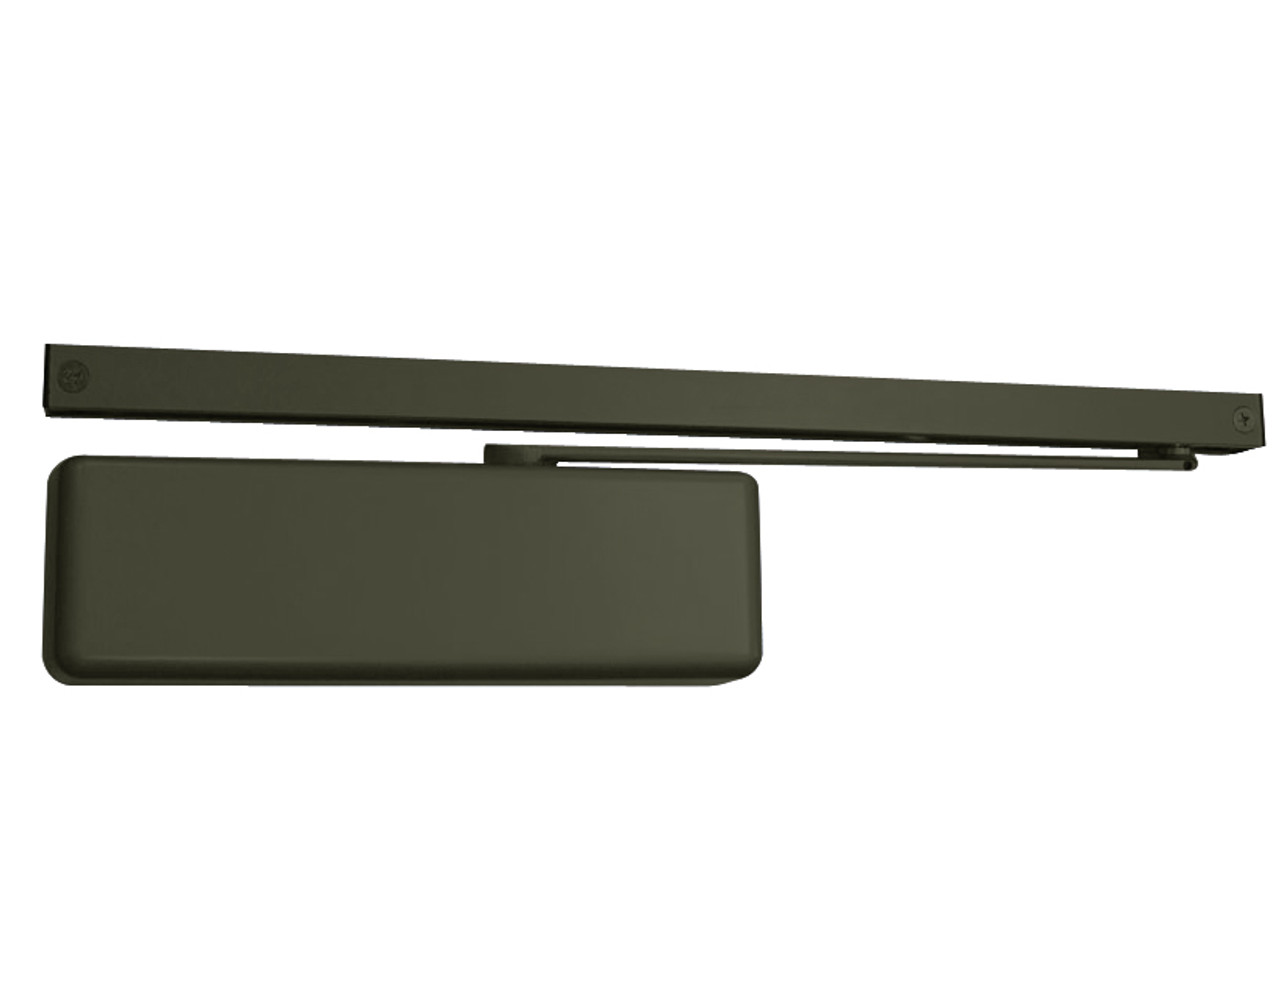 4040XPT-DE-H-BUMPER-LH-US10B LCN Door Closer Double Egress Hold Open Track with Bumper Arm in Oil Rubbed Bronze Finish